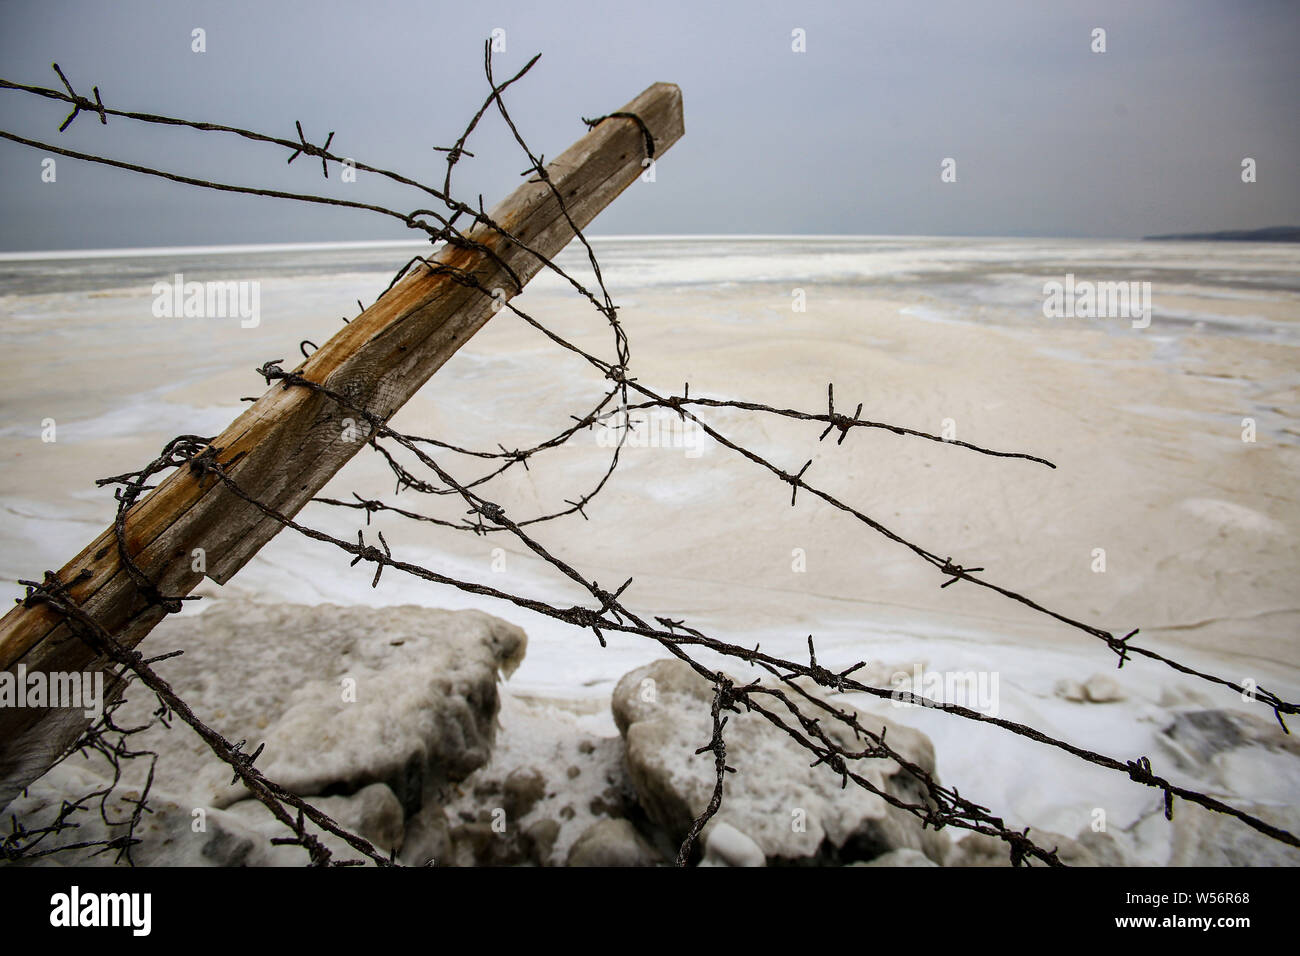 Landscape of the thick sea ice on the frozen sea surface at Bohai Sea in Dalian city, northeast China's Liaoning province, 7 February 2019. Stock Photo